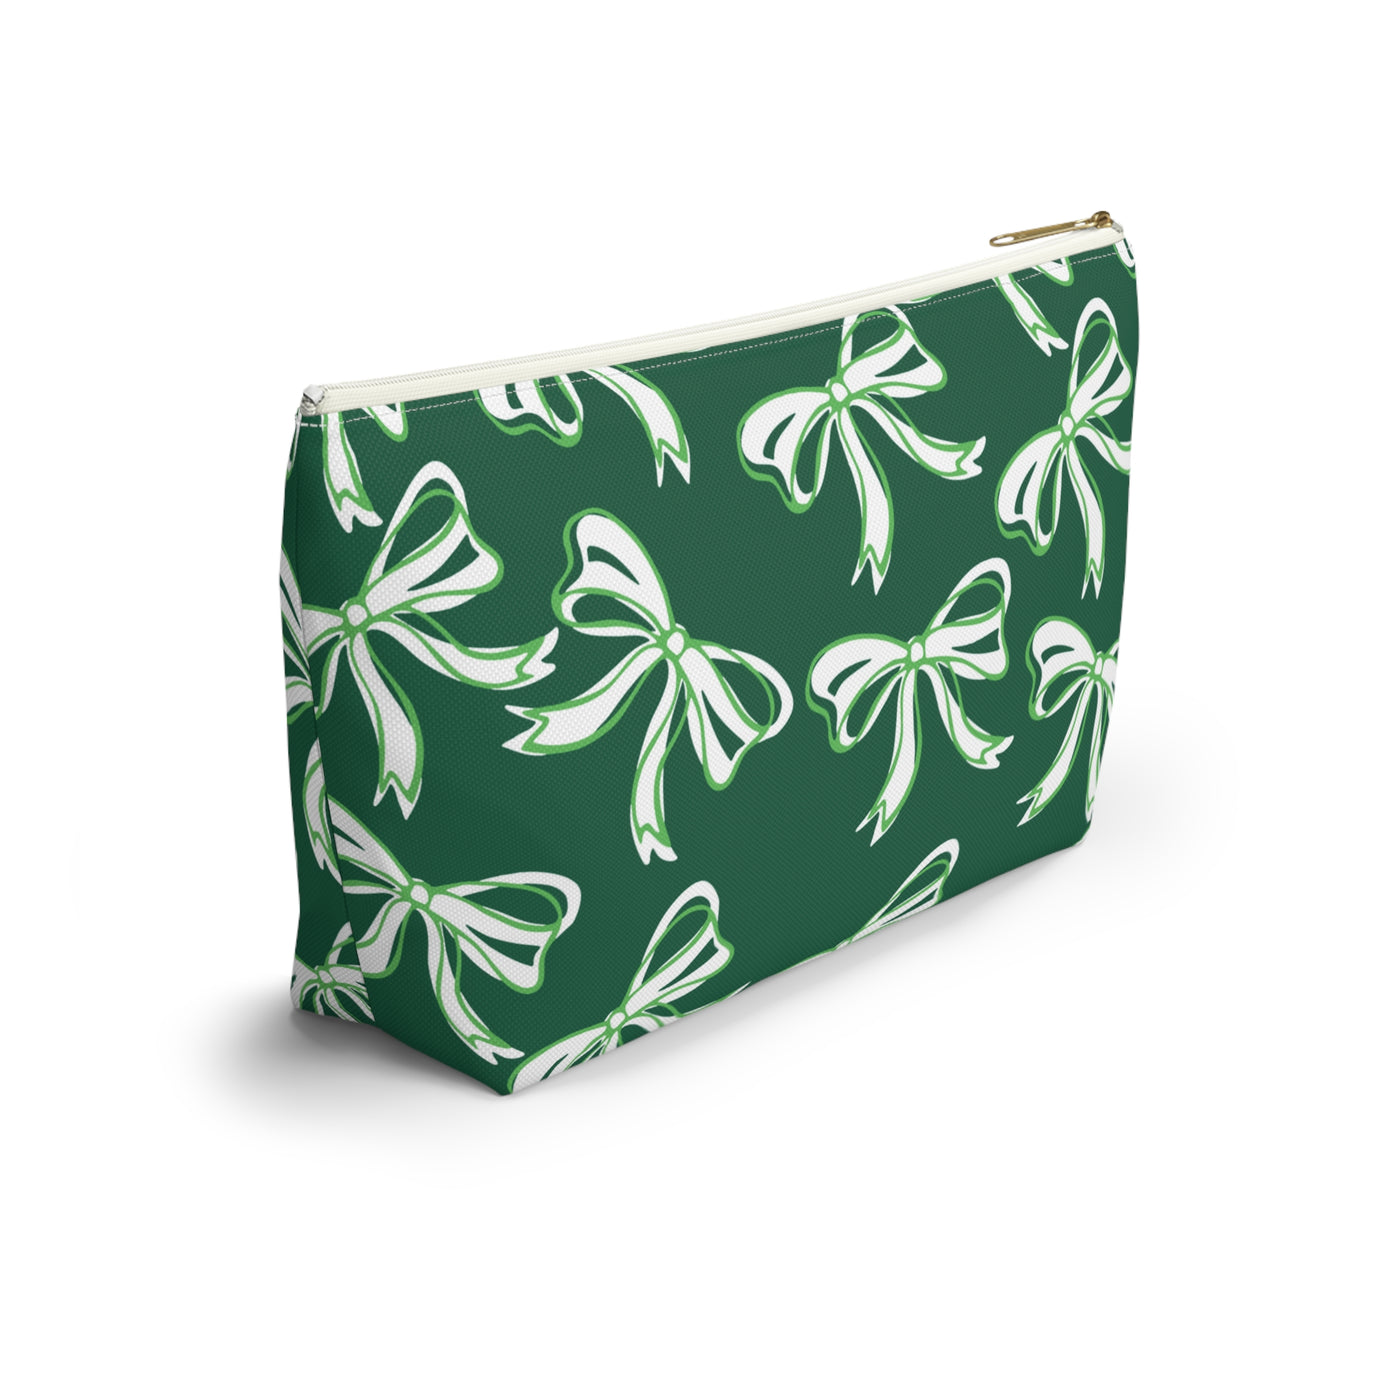 Trendy Bow Makeup Bag - Graduation Gift, Bed Party Gift, Acceptance Gift, College Gift, Binghamton Bearcats, BING, green and white